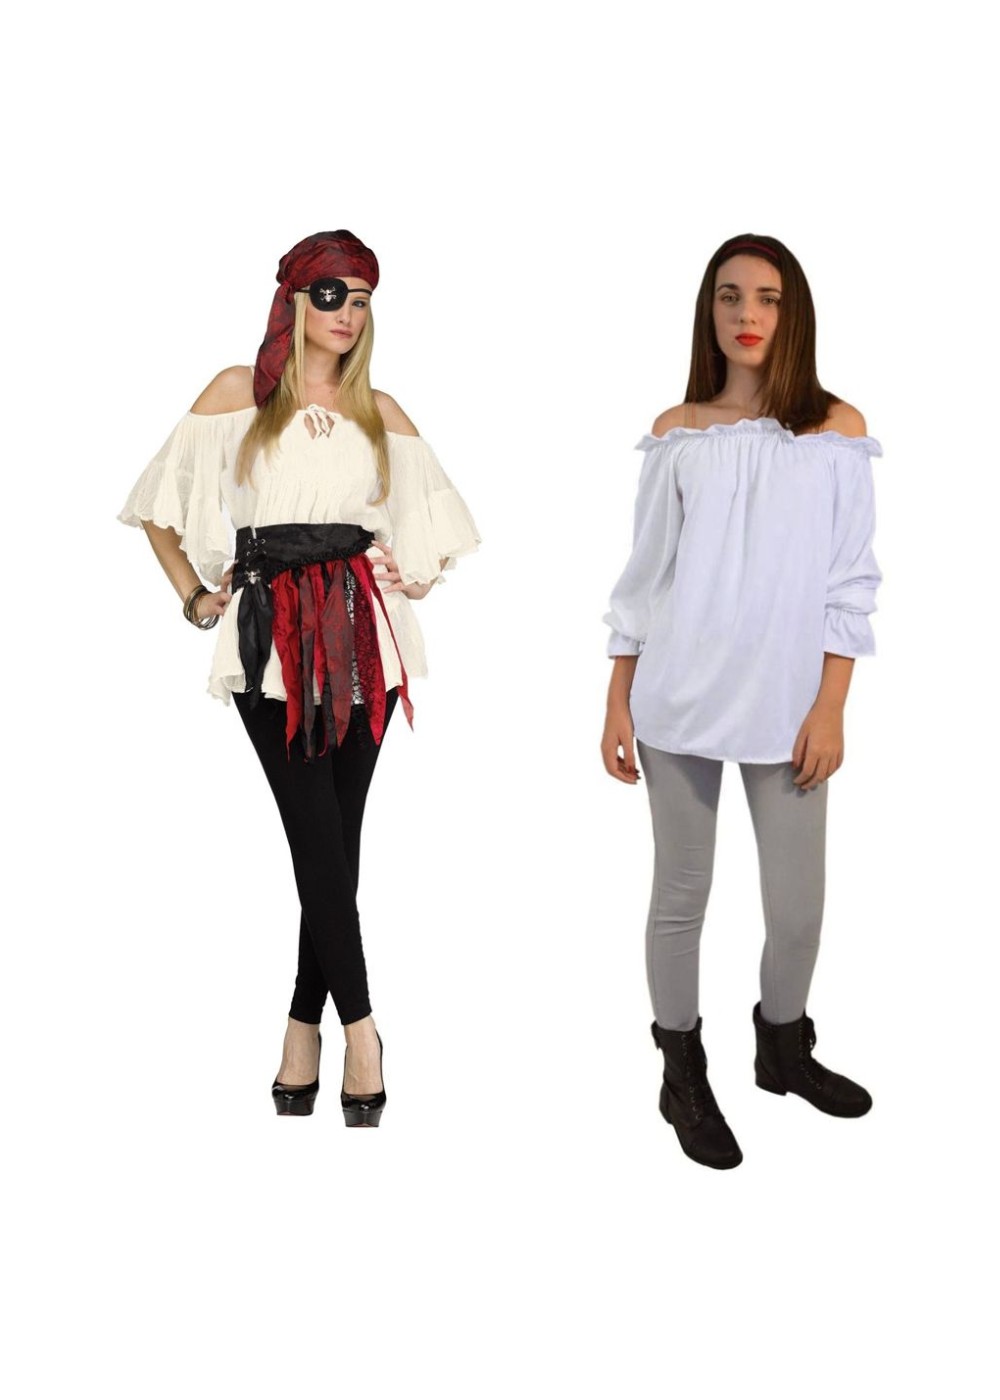 Pirate Woman Costume Set With White Shirt